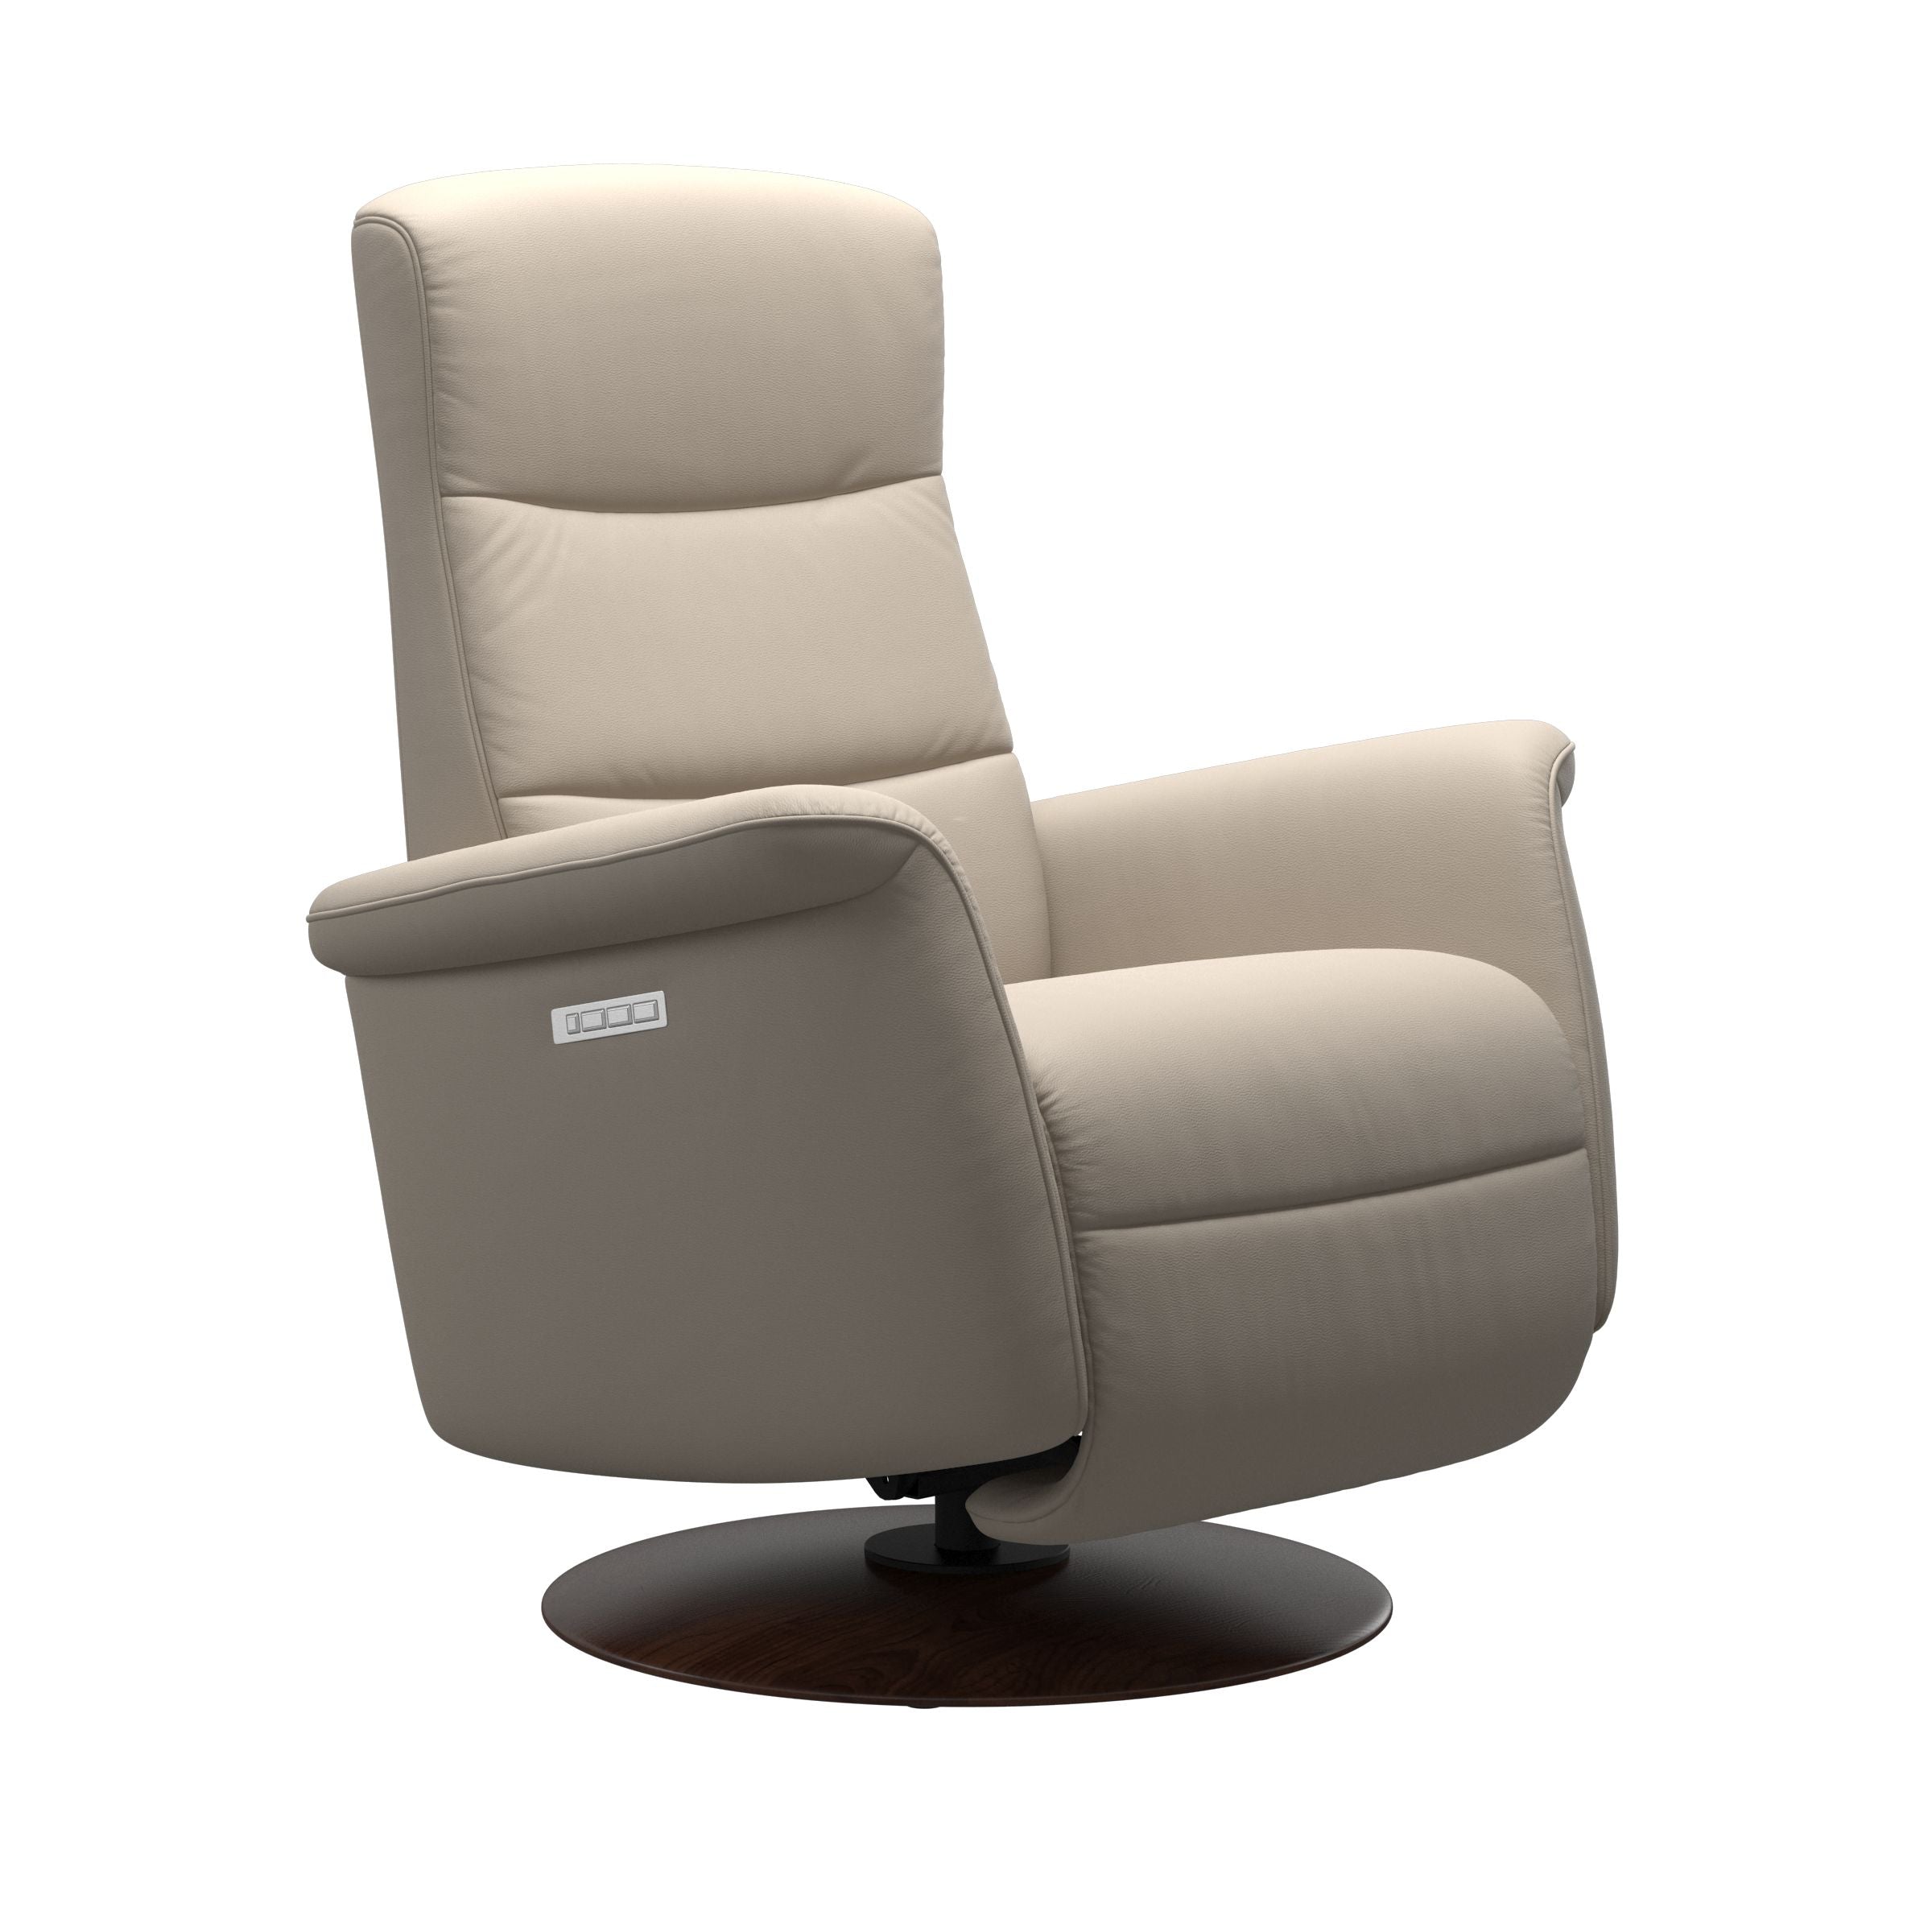 Stressless Mike Large Recliner with Wood Moon Base